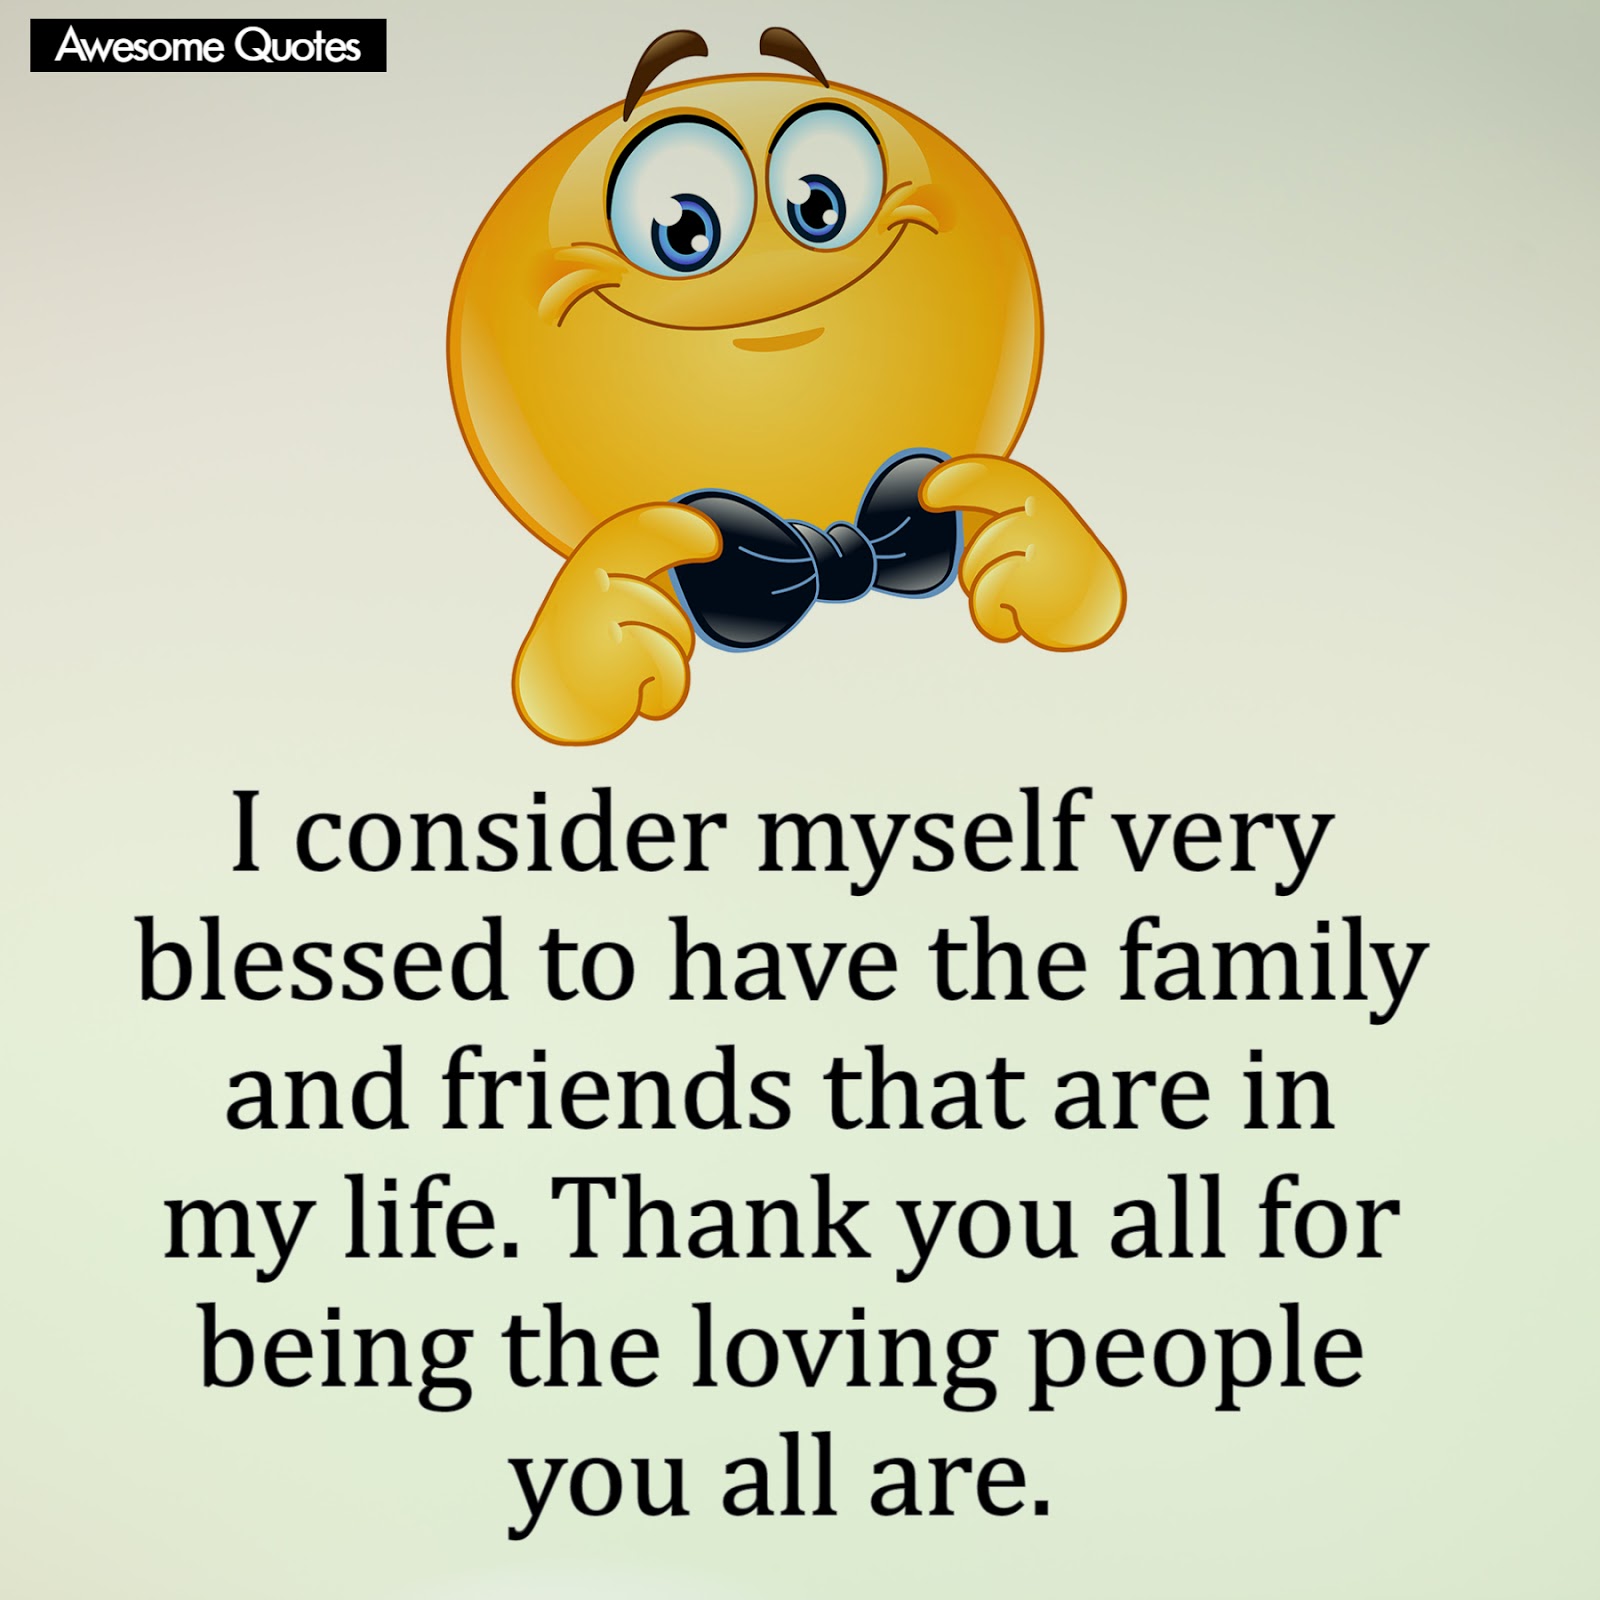 Awesomequotes4u.com: Thank you all for being the loving people